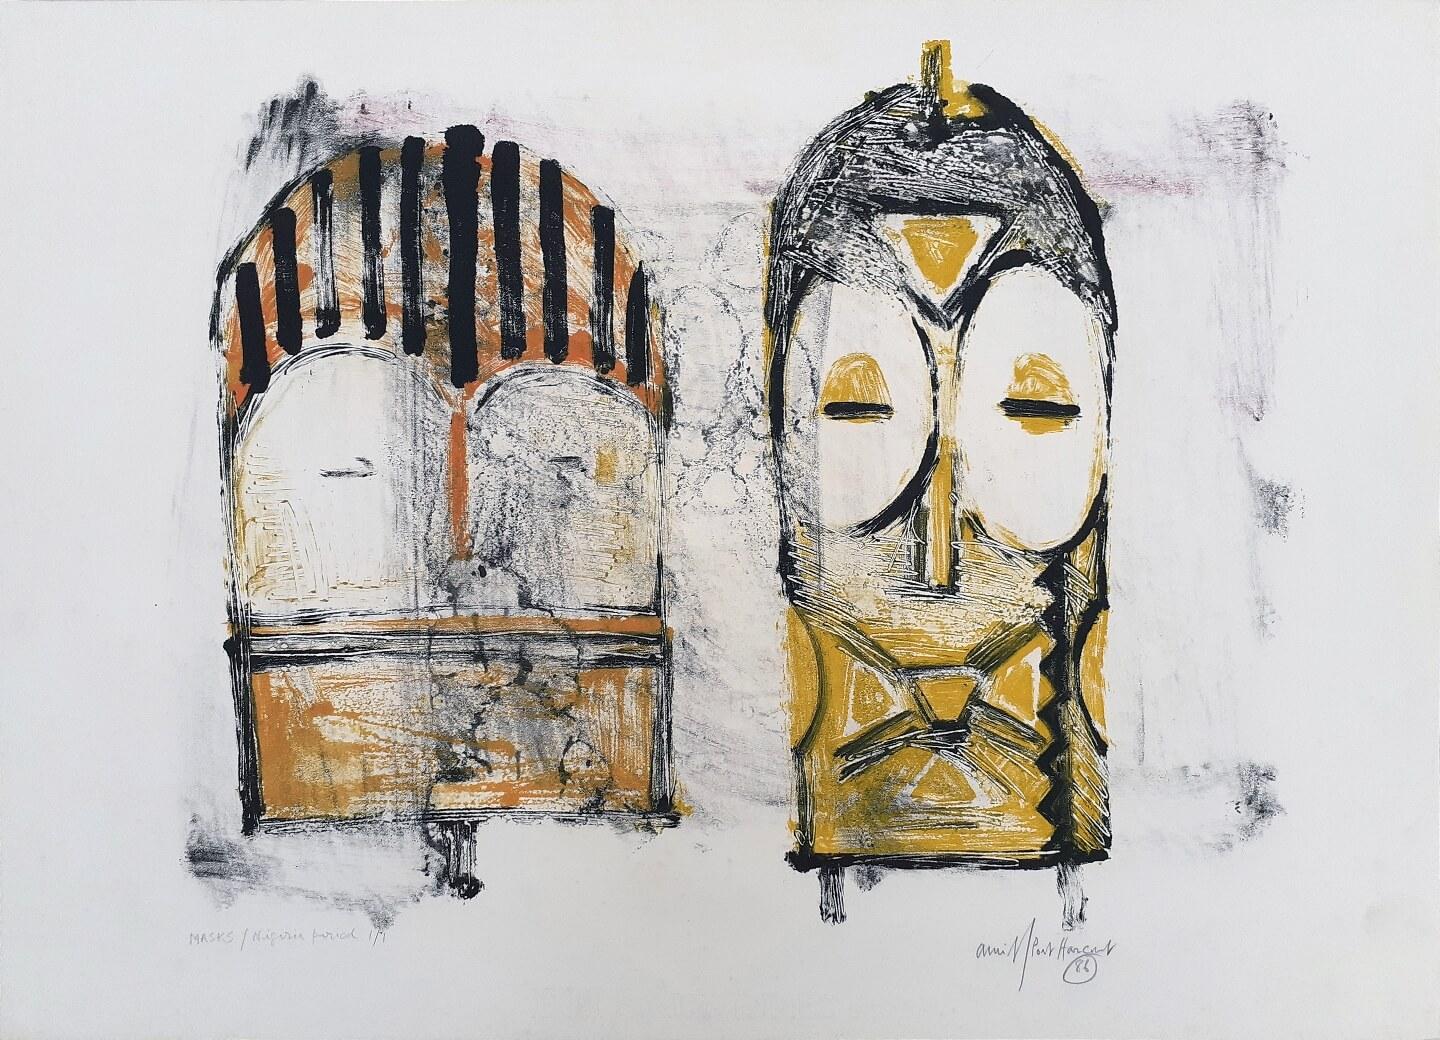 Amitabh Sengupta Abstract Painting - Masks Nigeria Period, Frottage on Paper, Edition 1/1 by Modern Artist "In Stock"